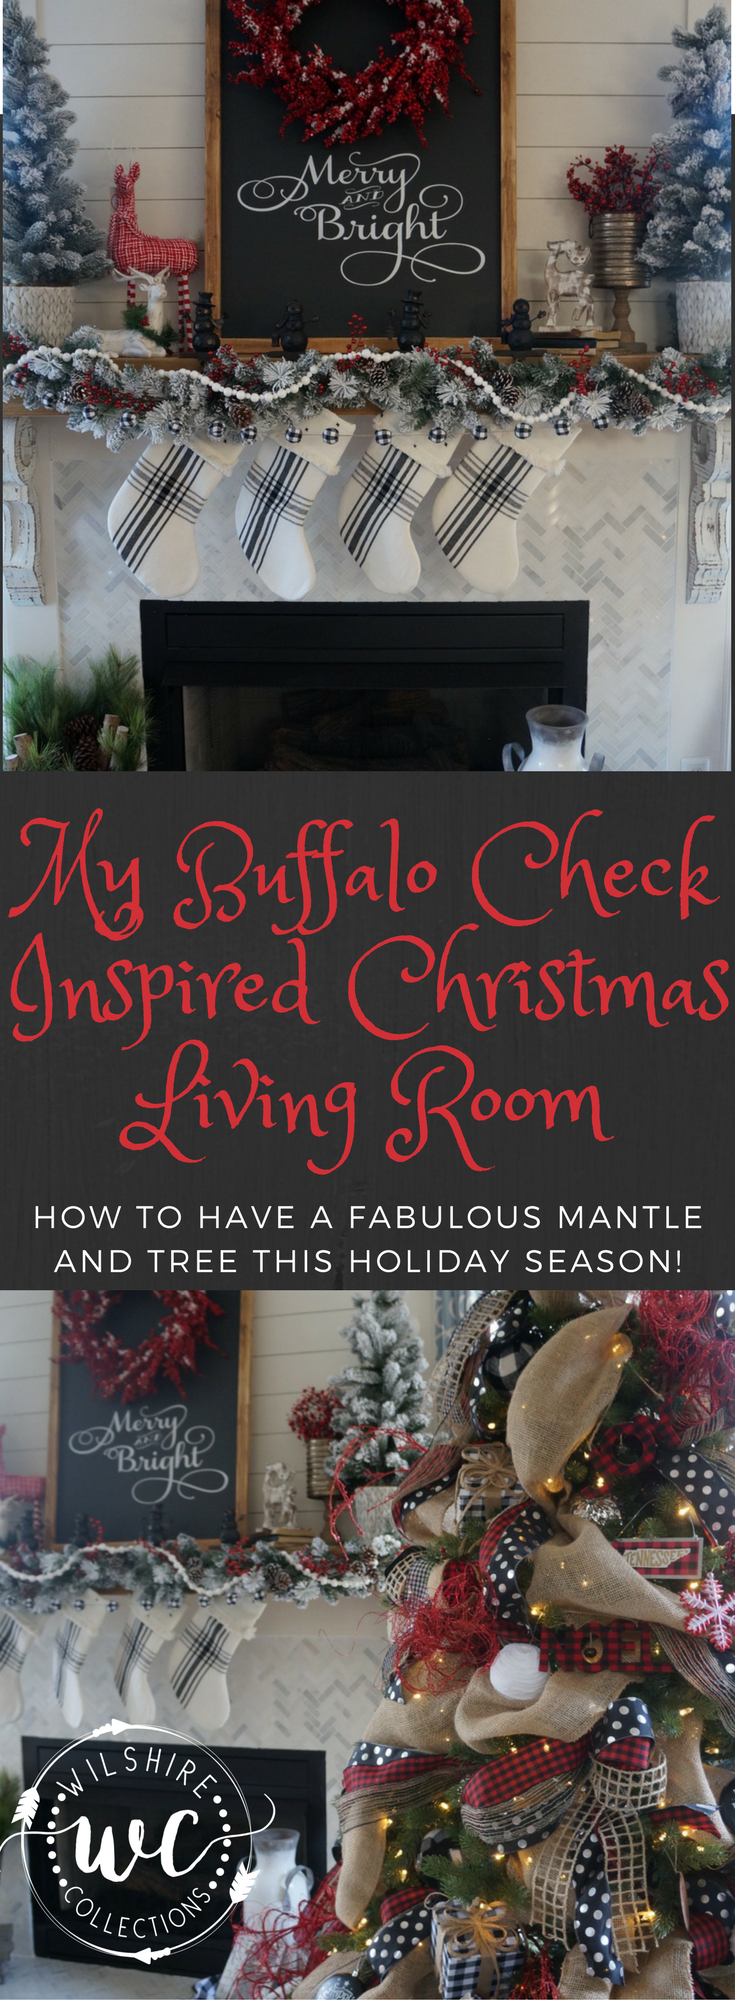 Buffalo Check And Plaid Inspired Christmas Decor In Living Room